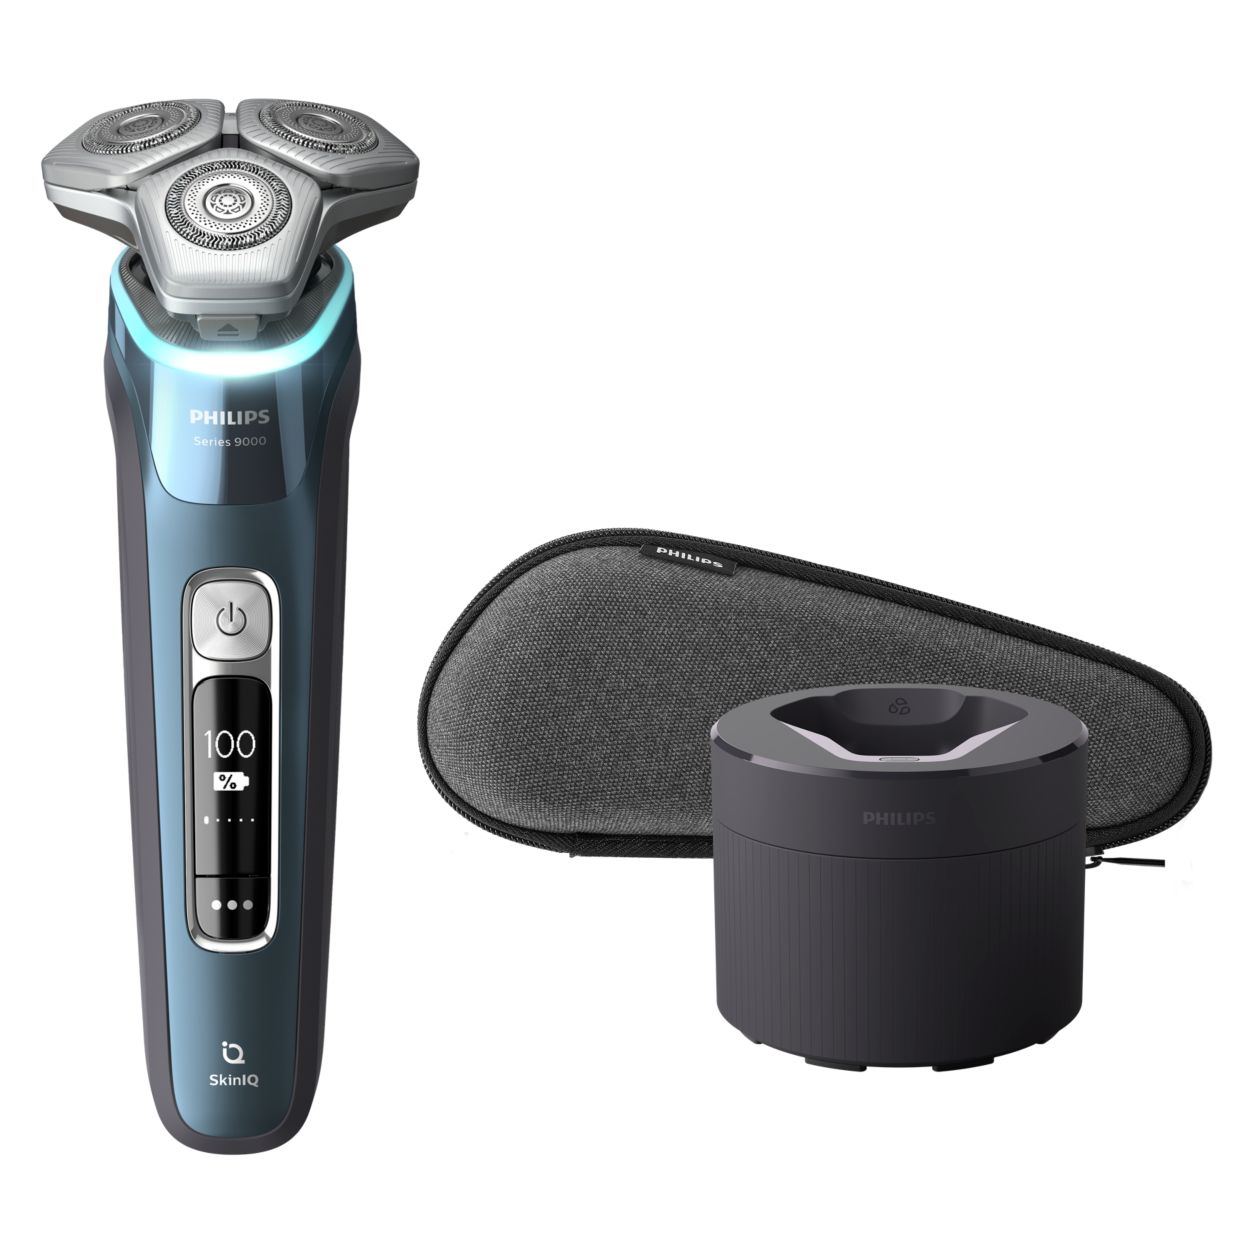 Shaver series 9000 Wet & Dry electric shaver with SkinIQ S9982/50